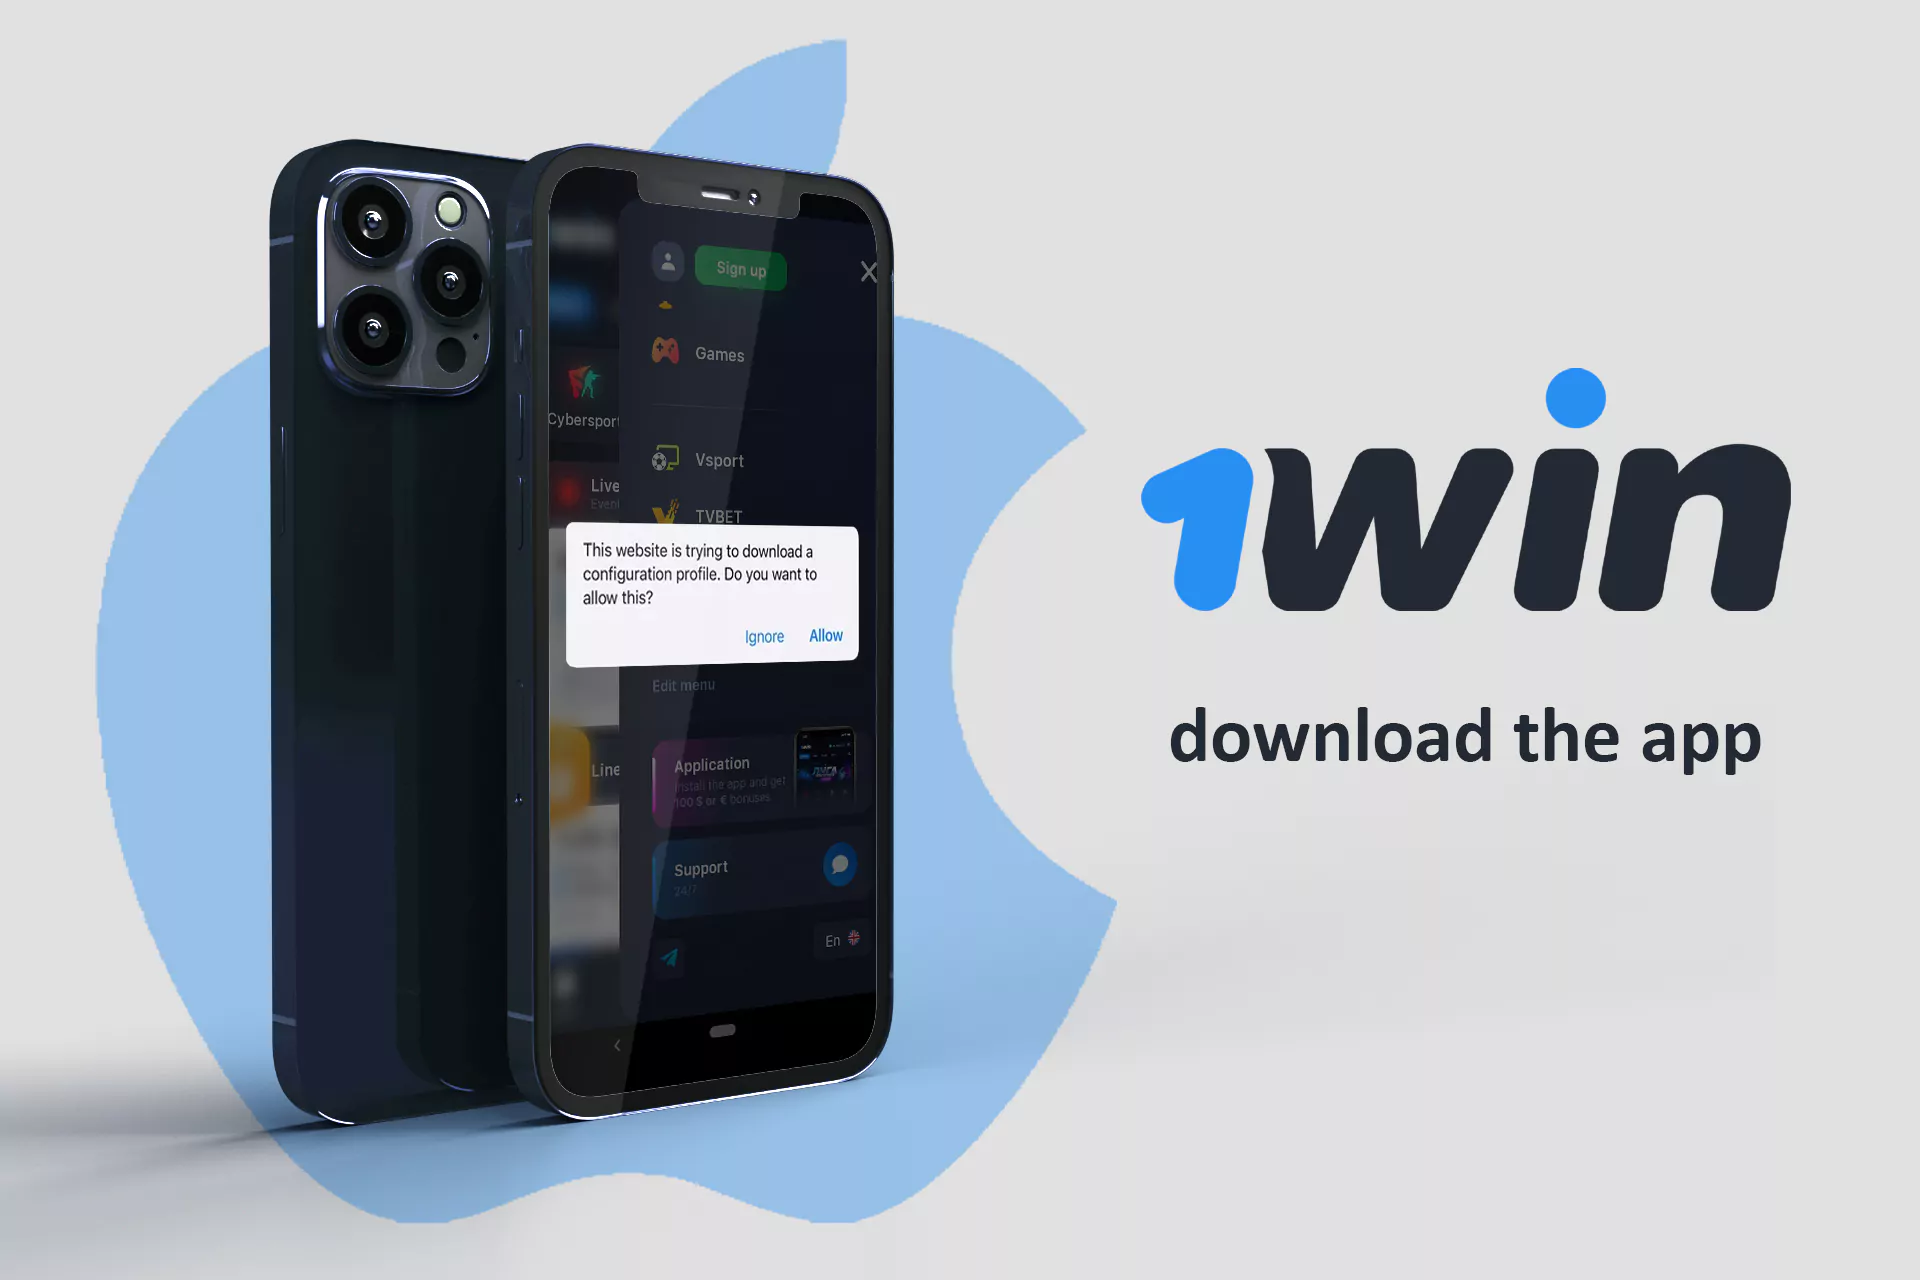 Download the 1 win mobile app for iOS.